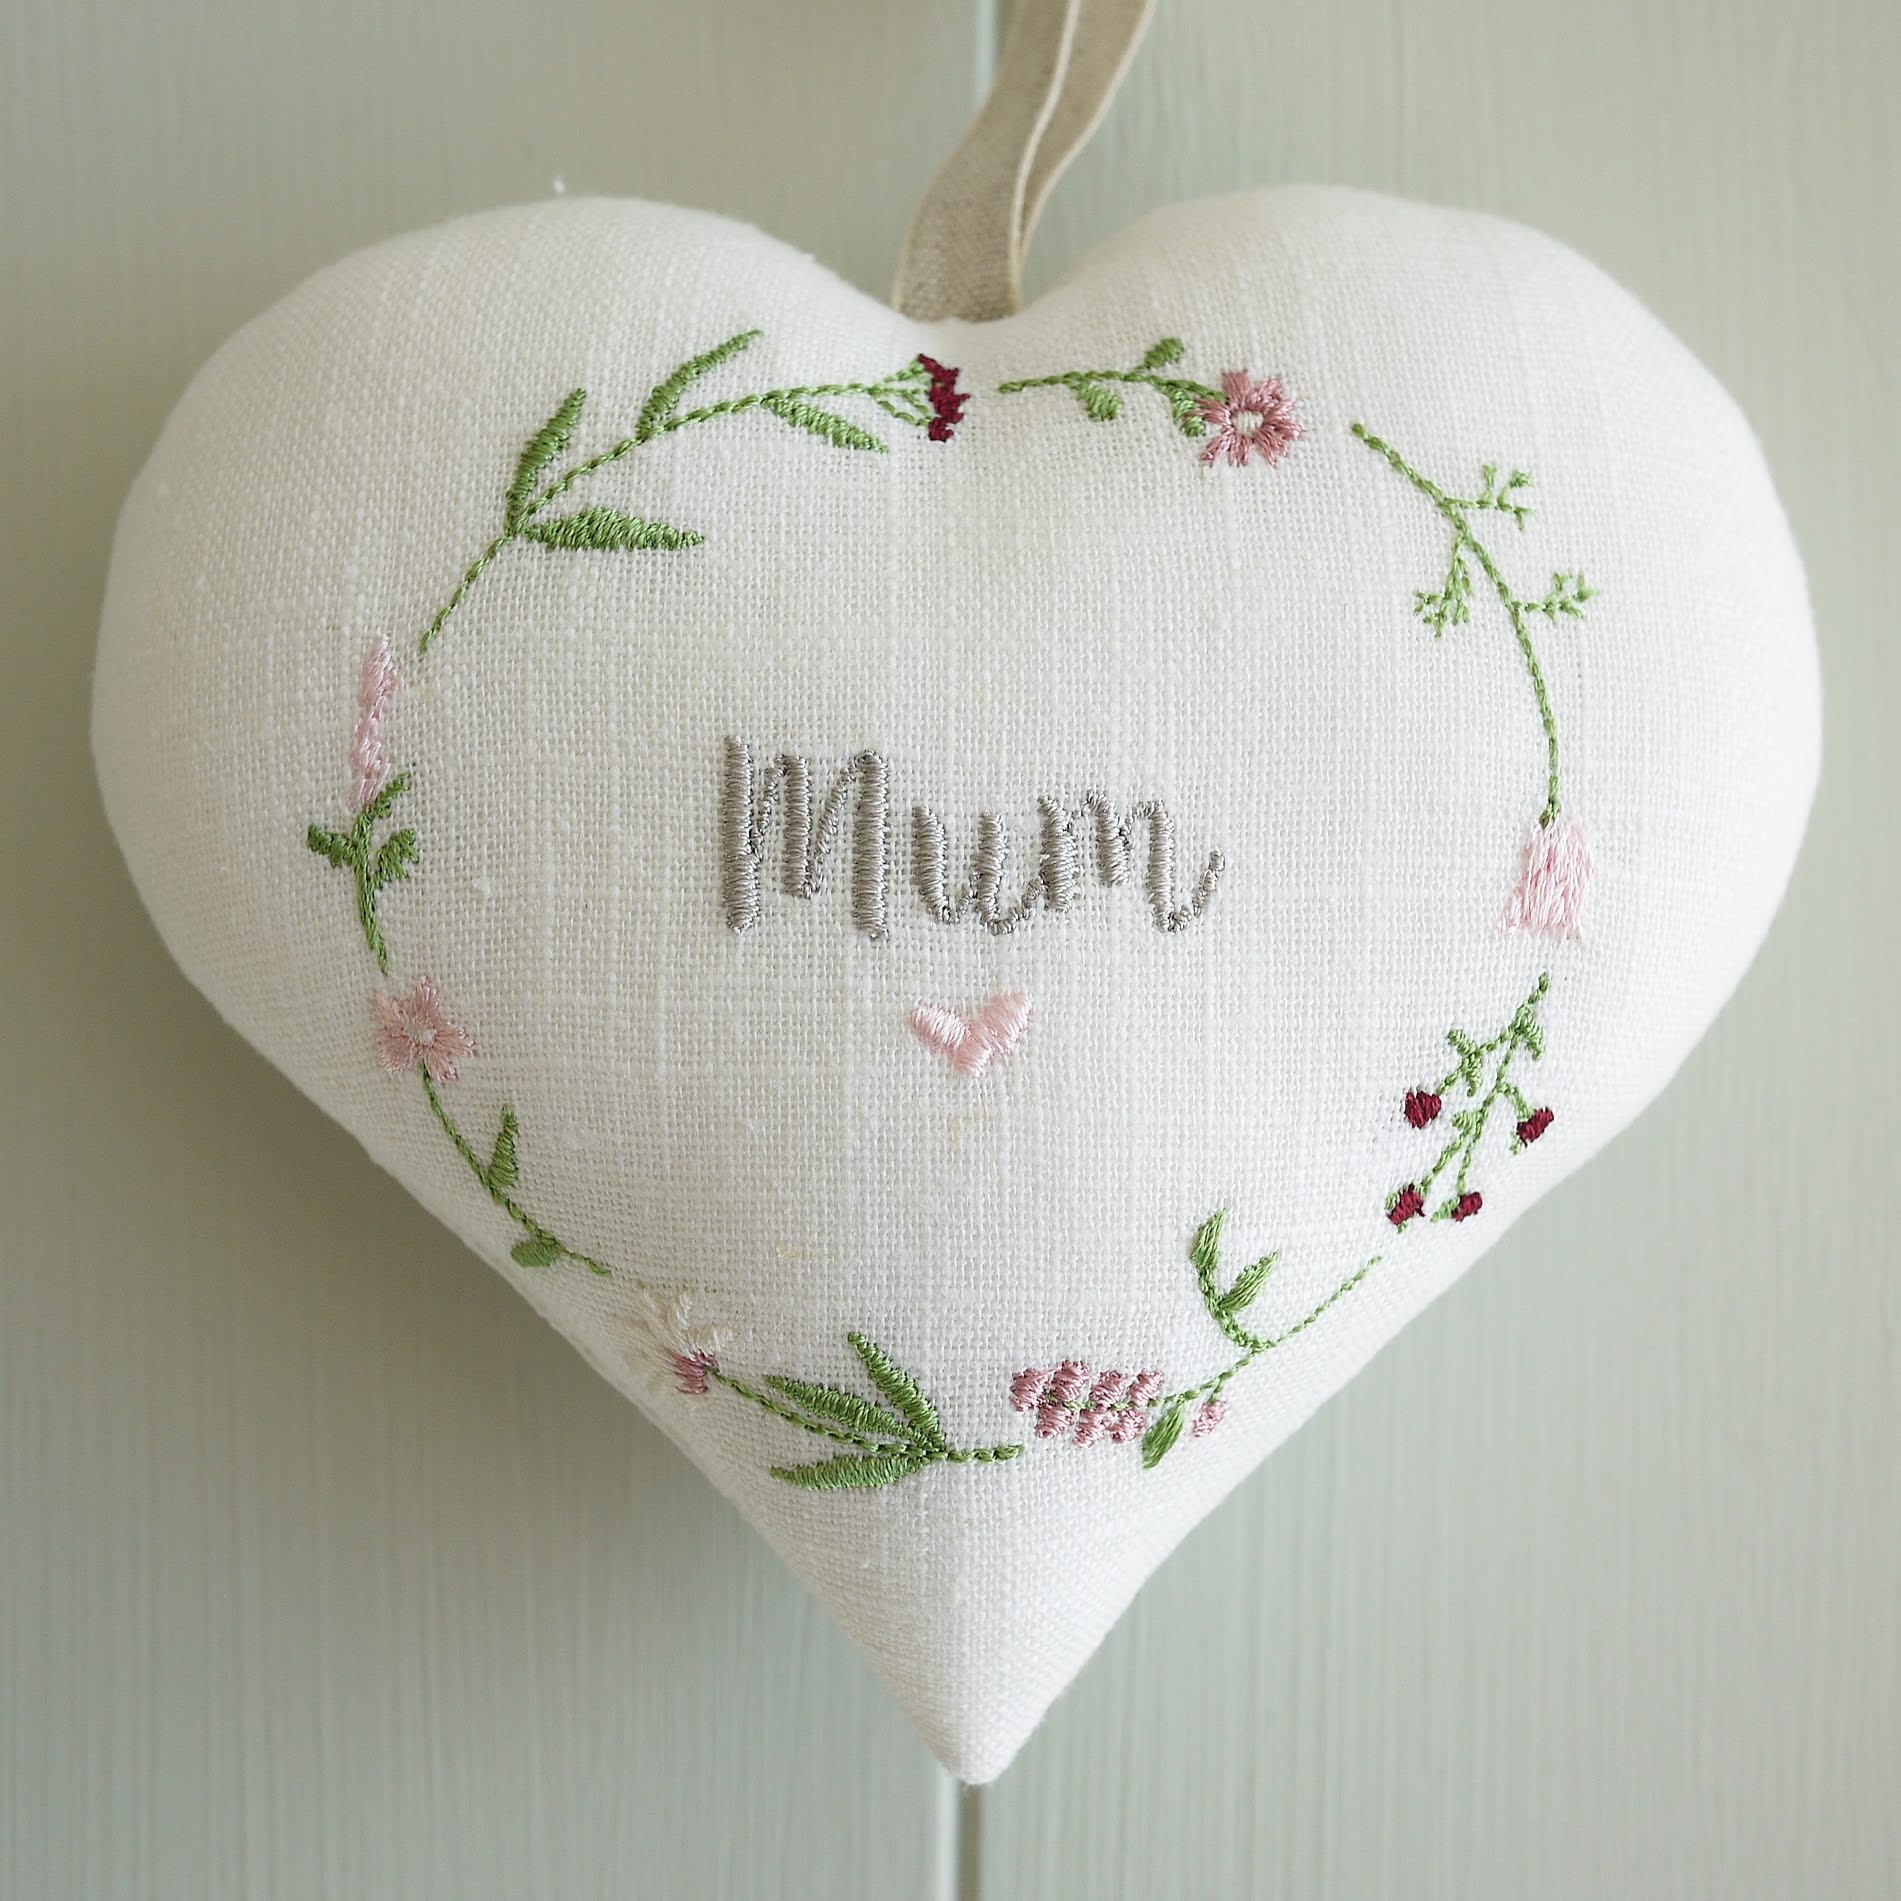 Personalised Heart & Mum Wooden Gift Set Mothers Day Gifts